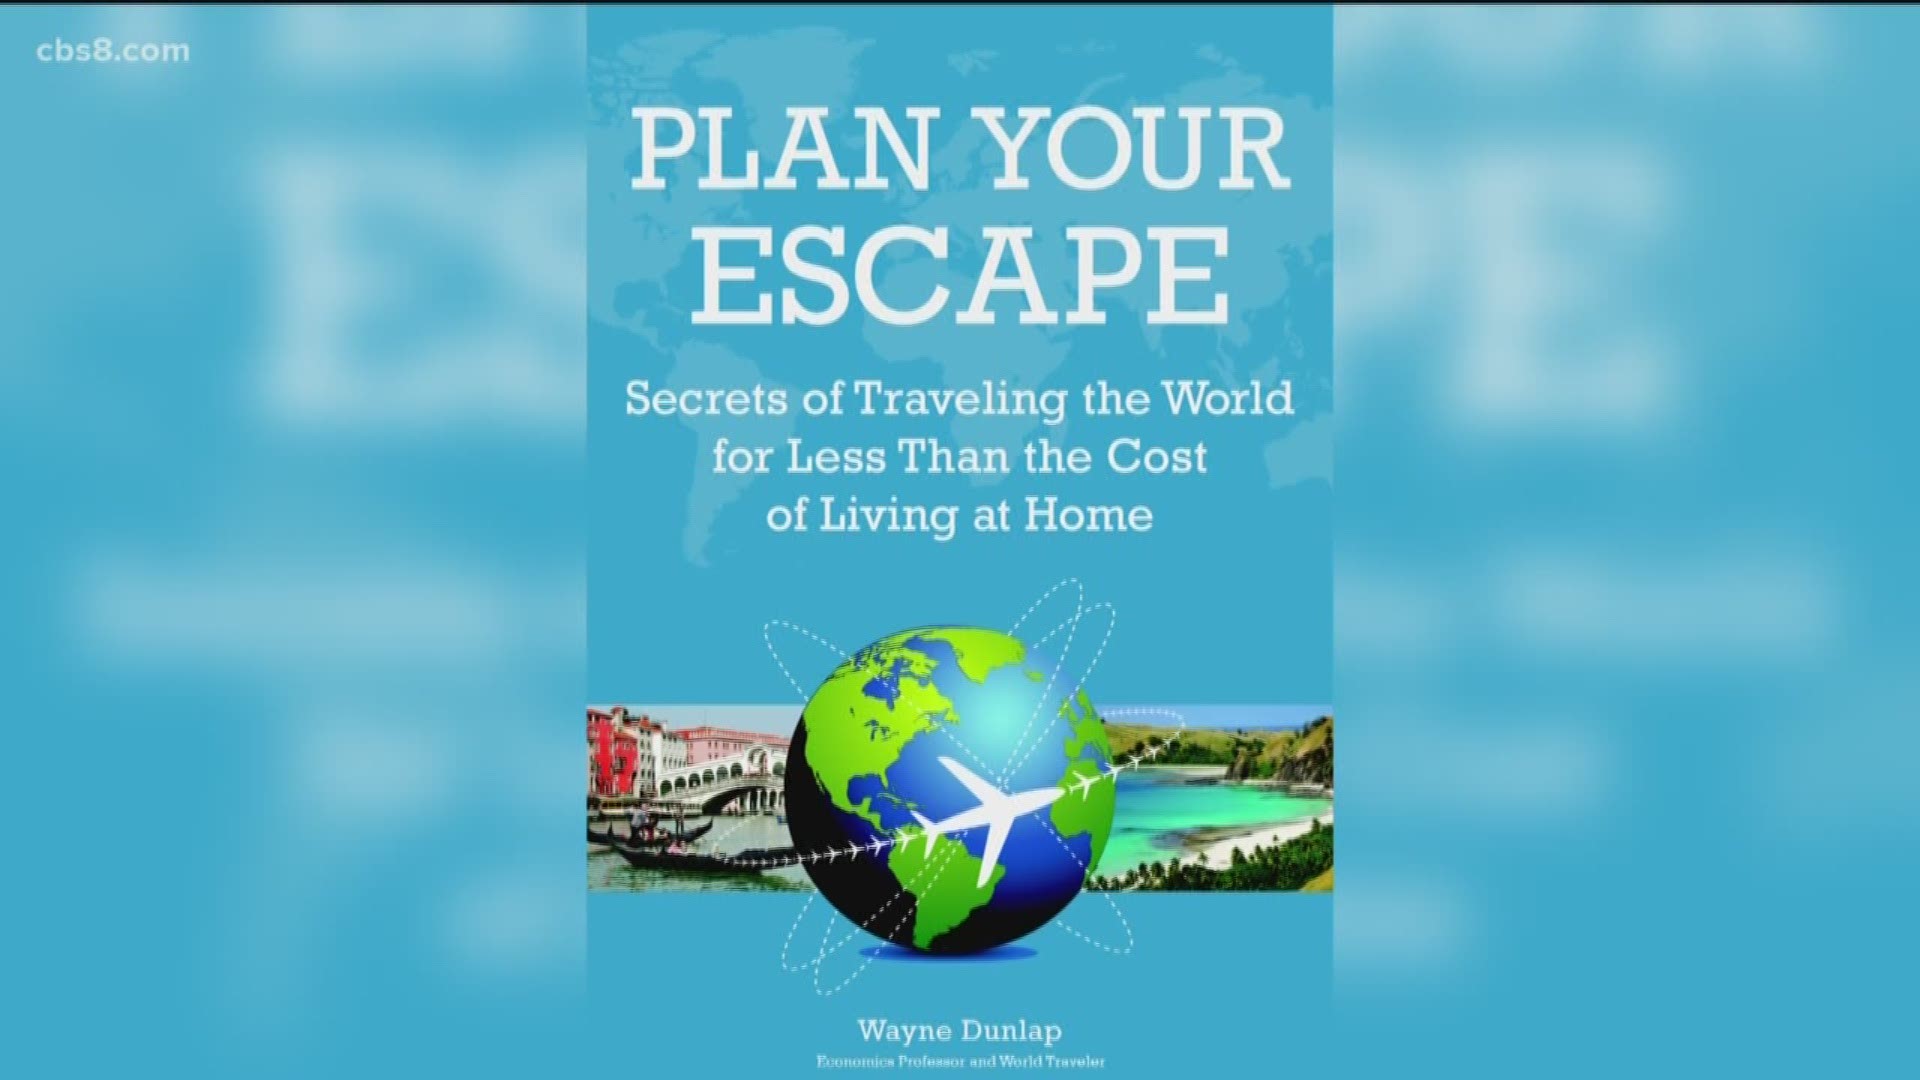 Wayne Dunlap and his wife, Pat, have visited 100 countries and 47 U.S. states and gives easy-to-use strategies to help you travel for half the cost